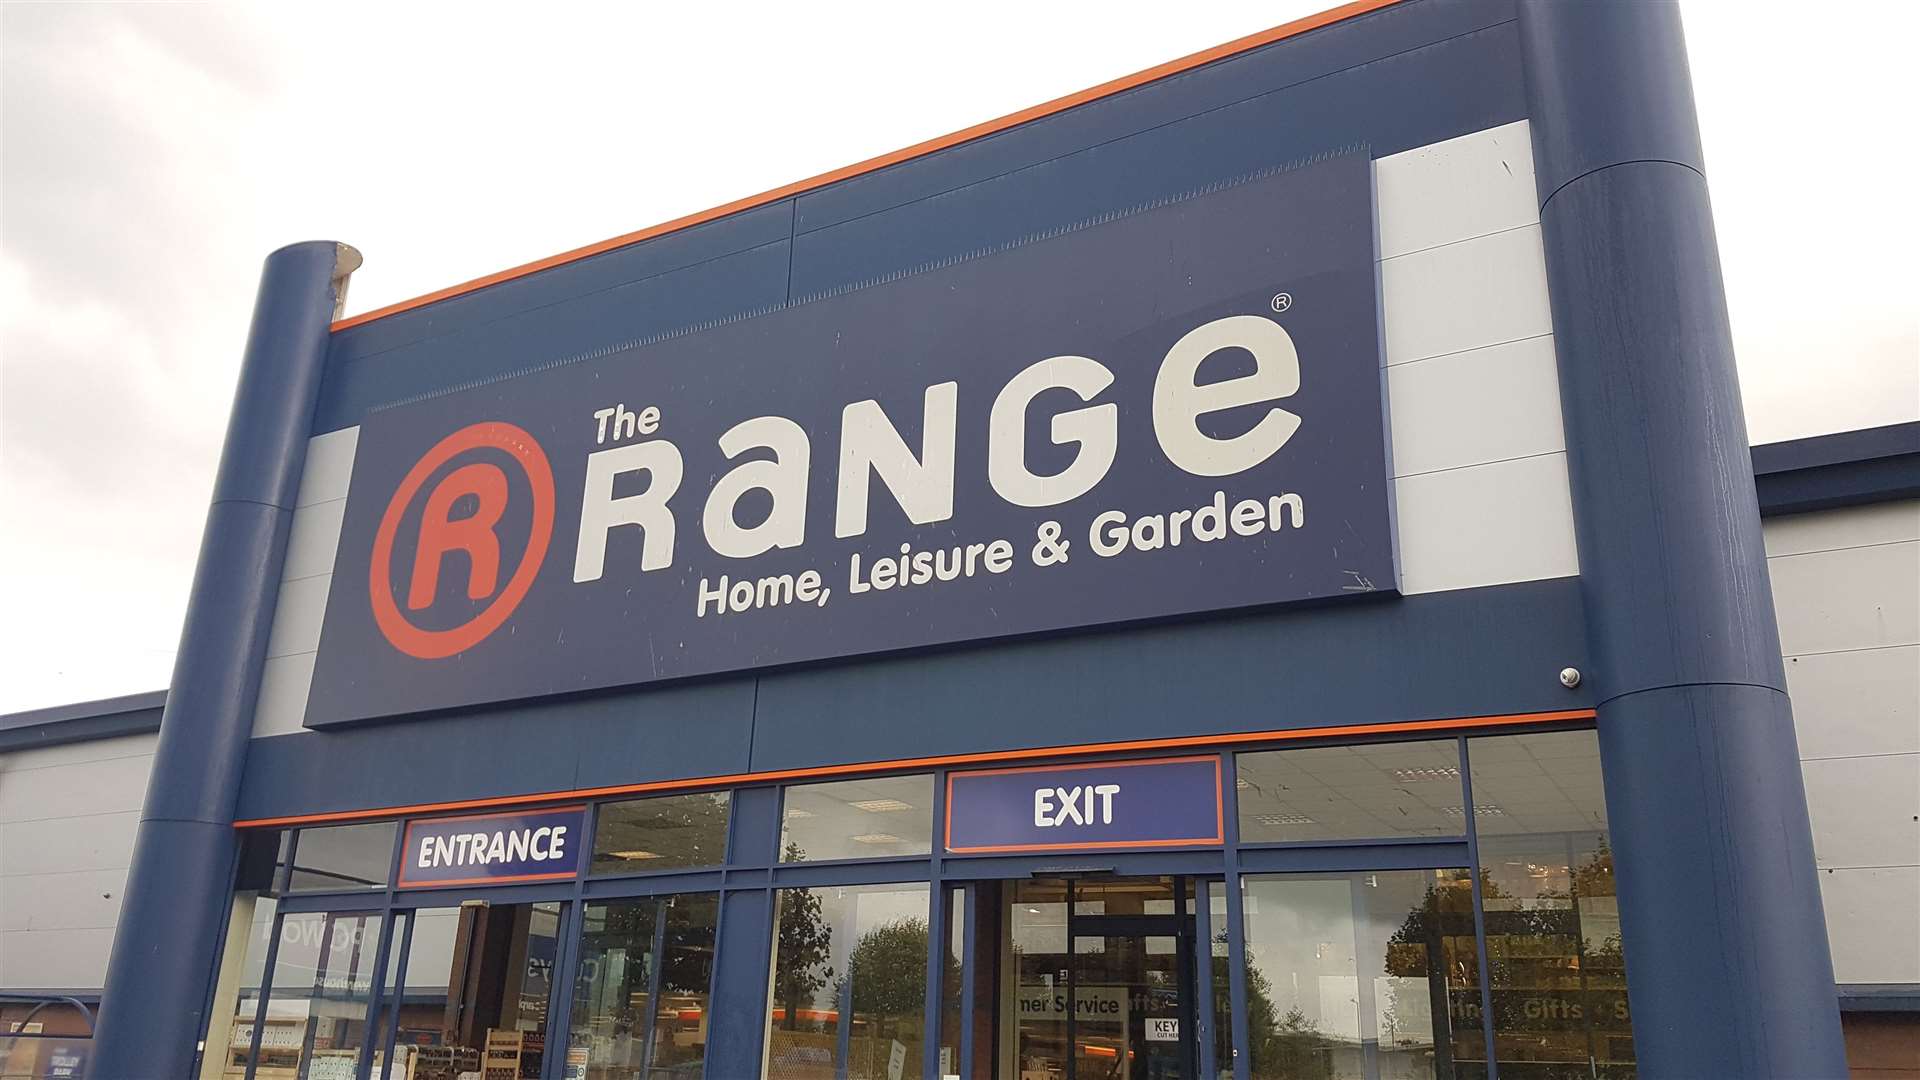 The Range in Canterbury is set to house an Iceland branch and cafe